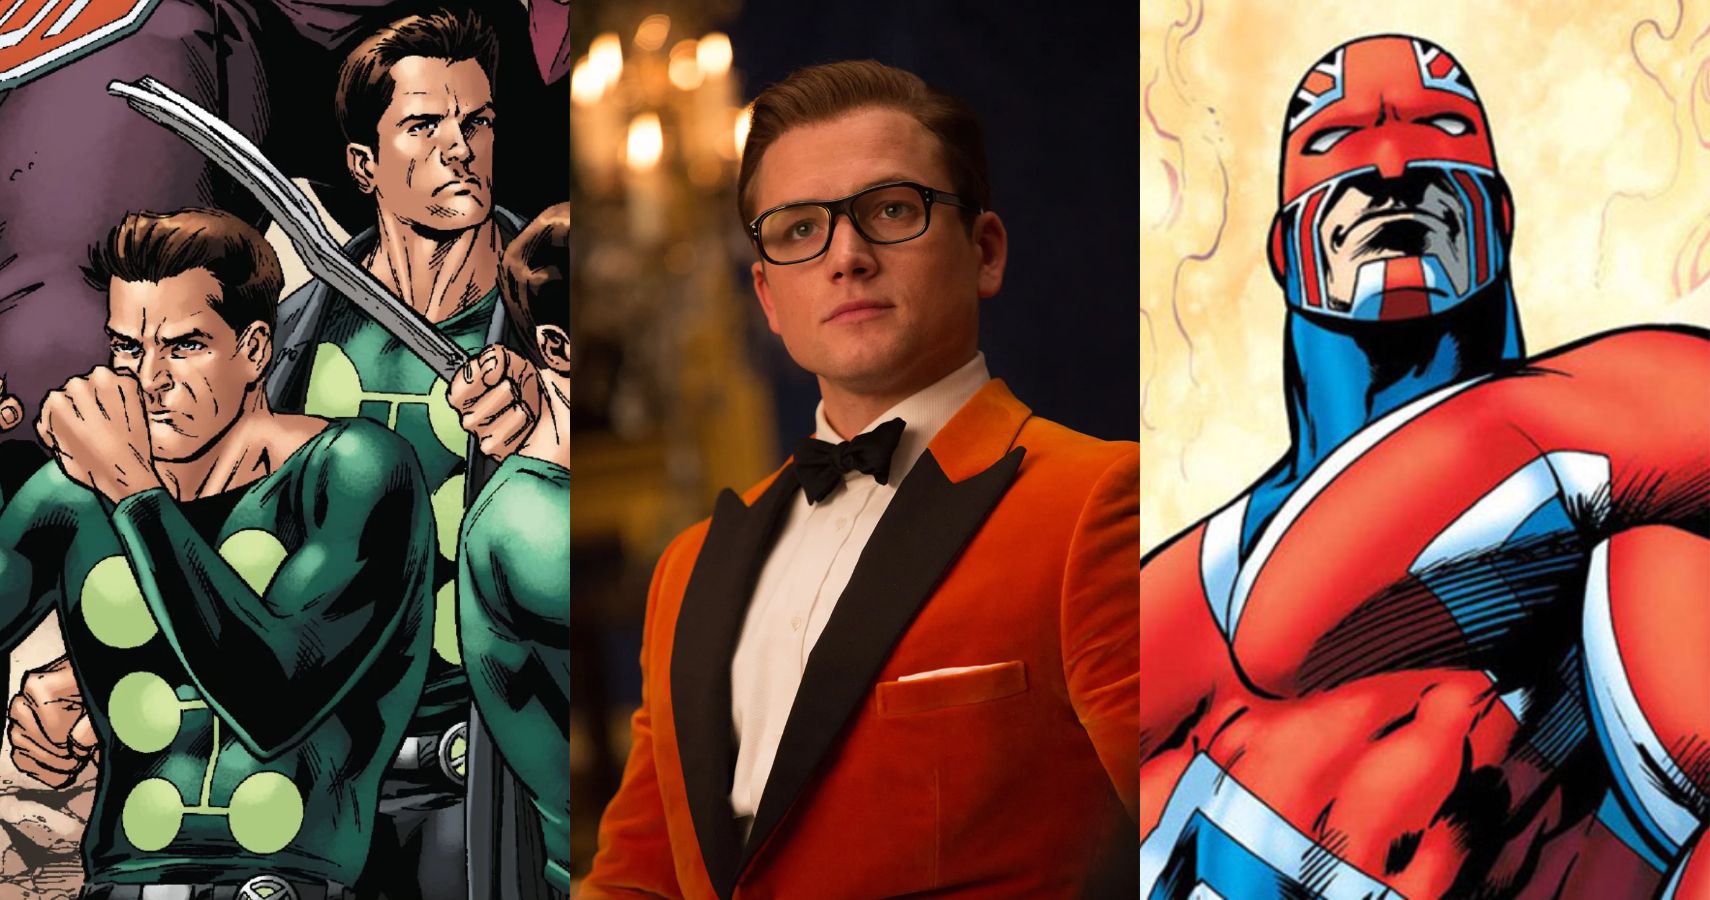 A combined feature image showcasing characters Taron Egerton could play in the MCU such as Multiple Man and Captain Britain